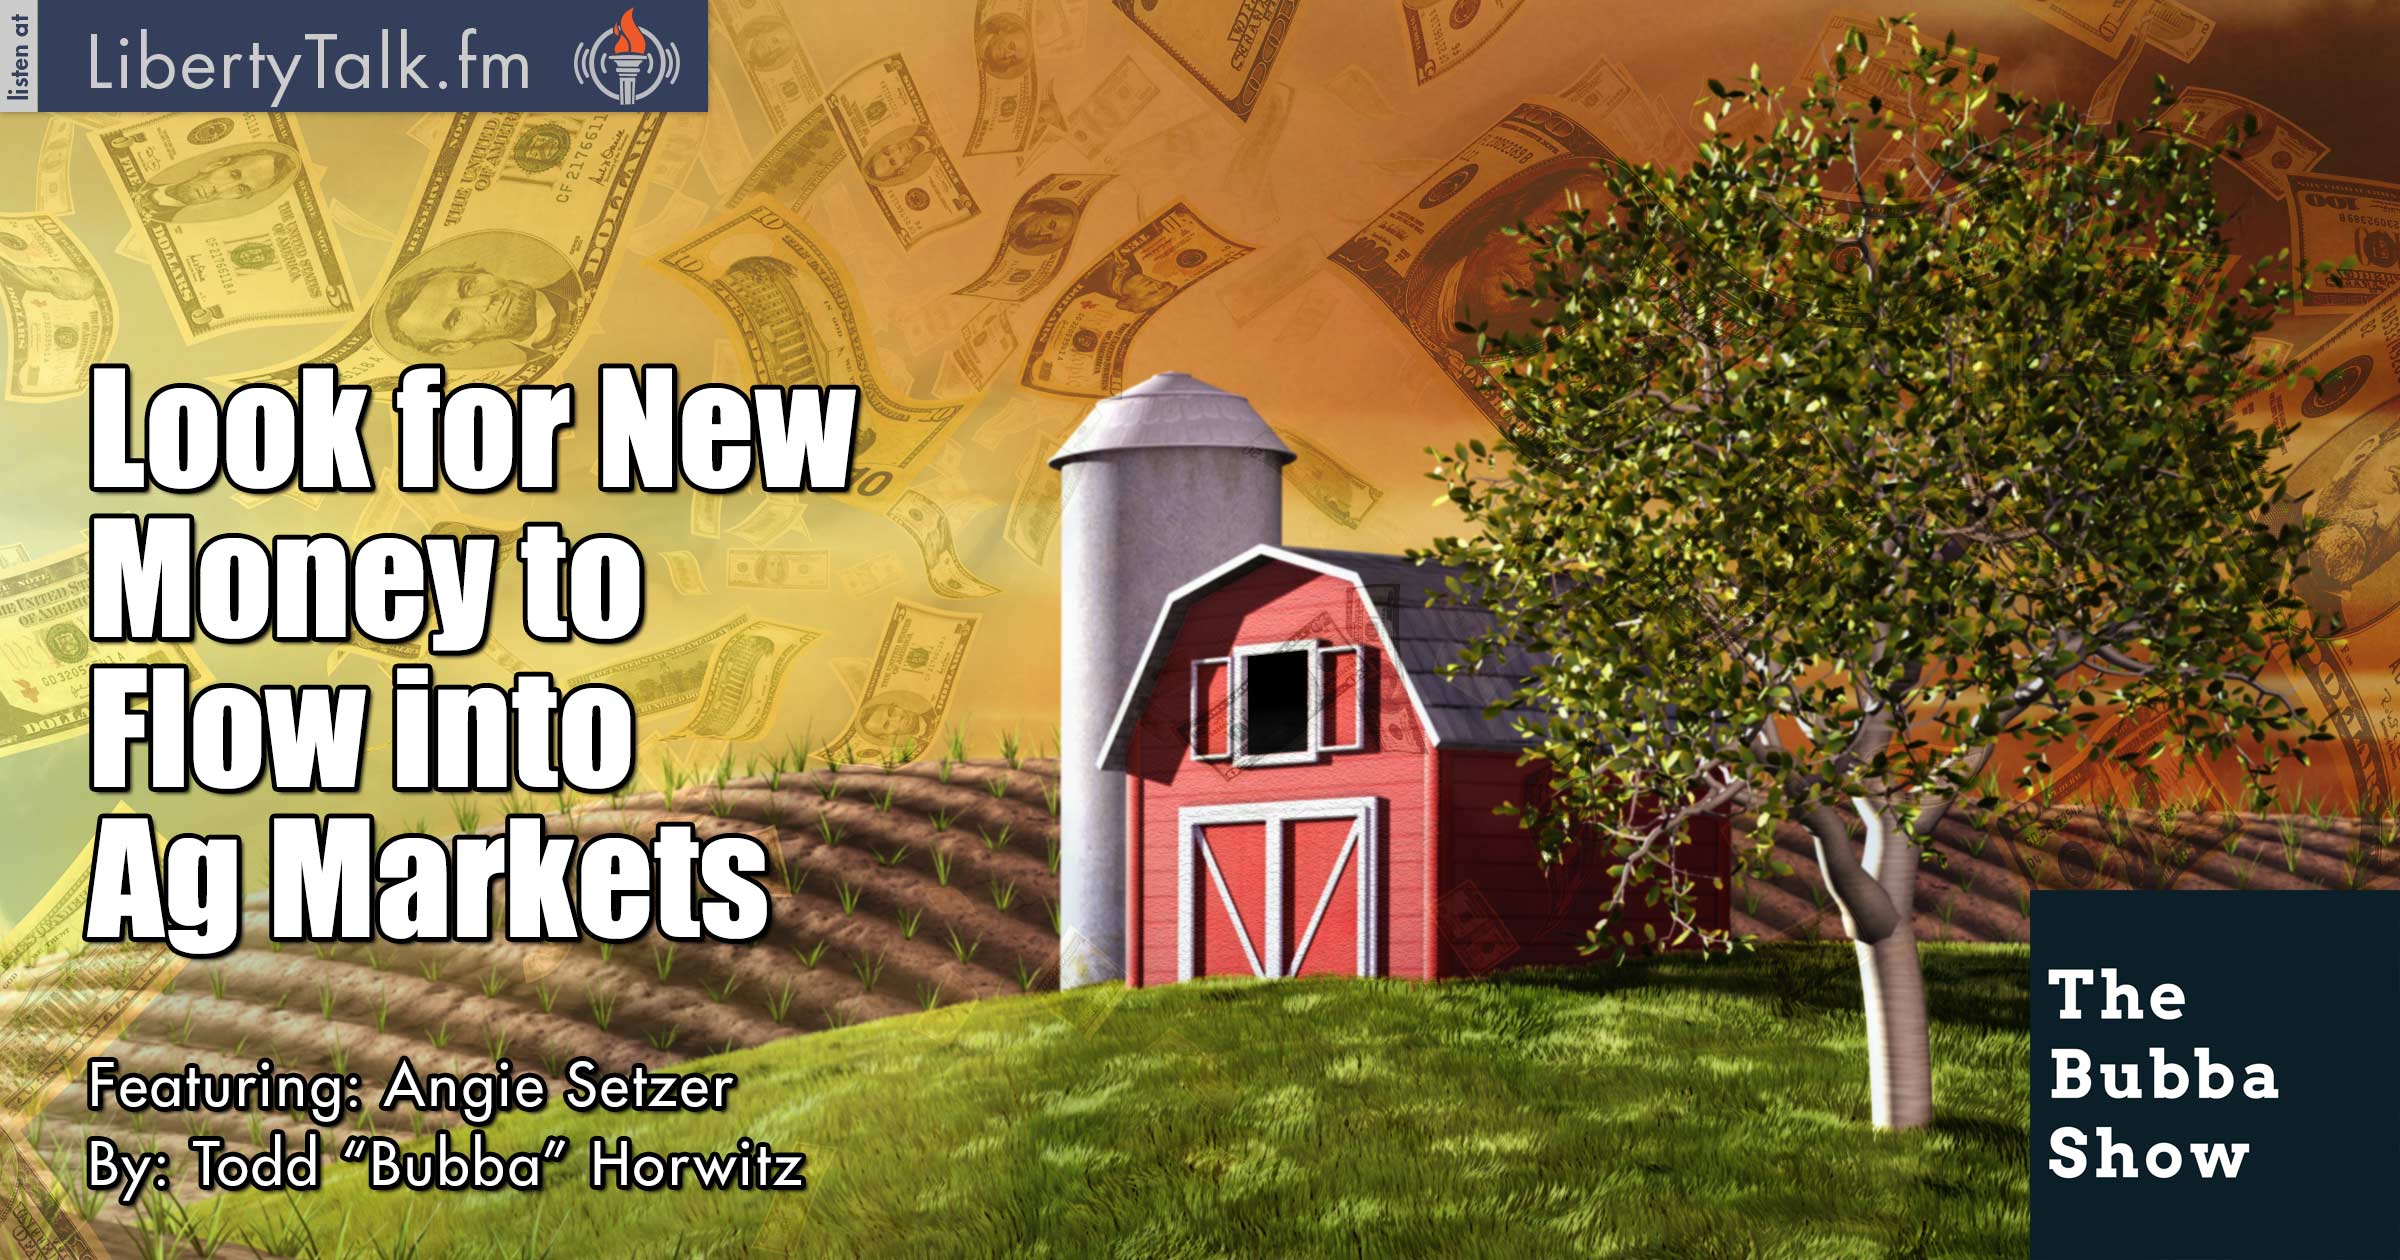 Look for New Money to Flow into Ag Markets - The Bubba Show